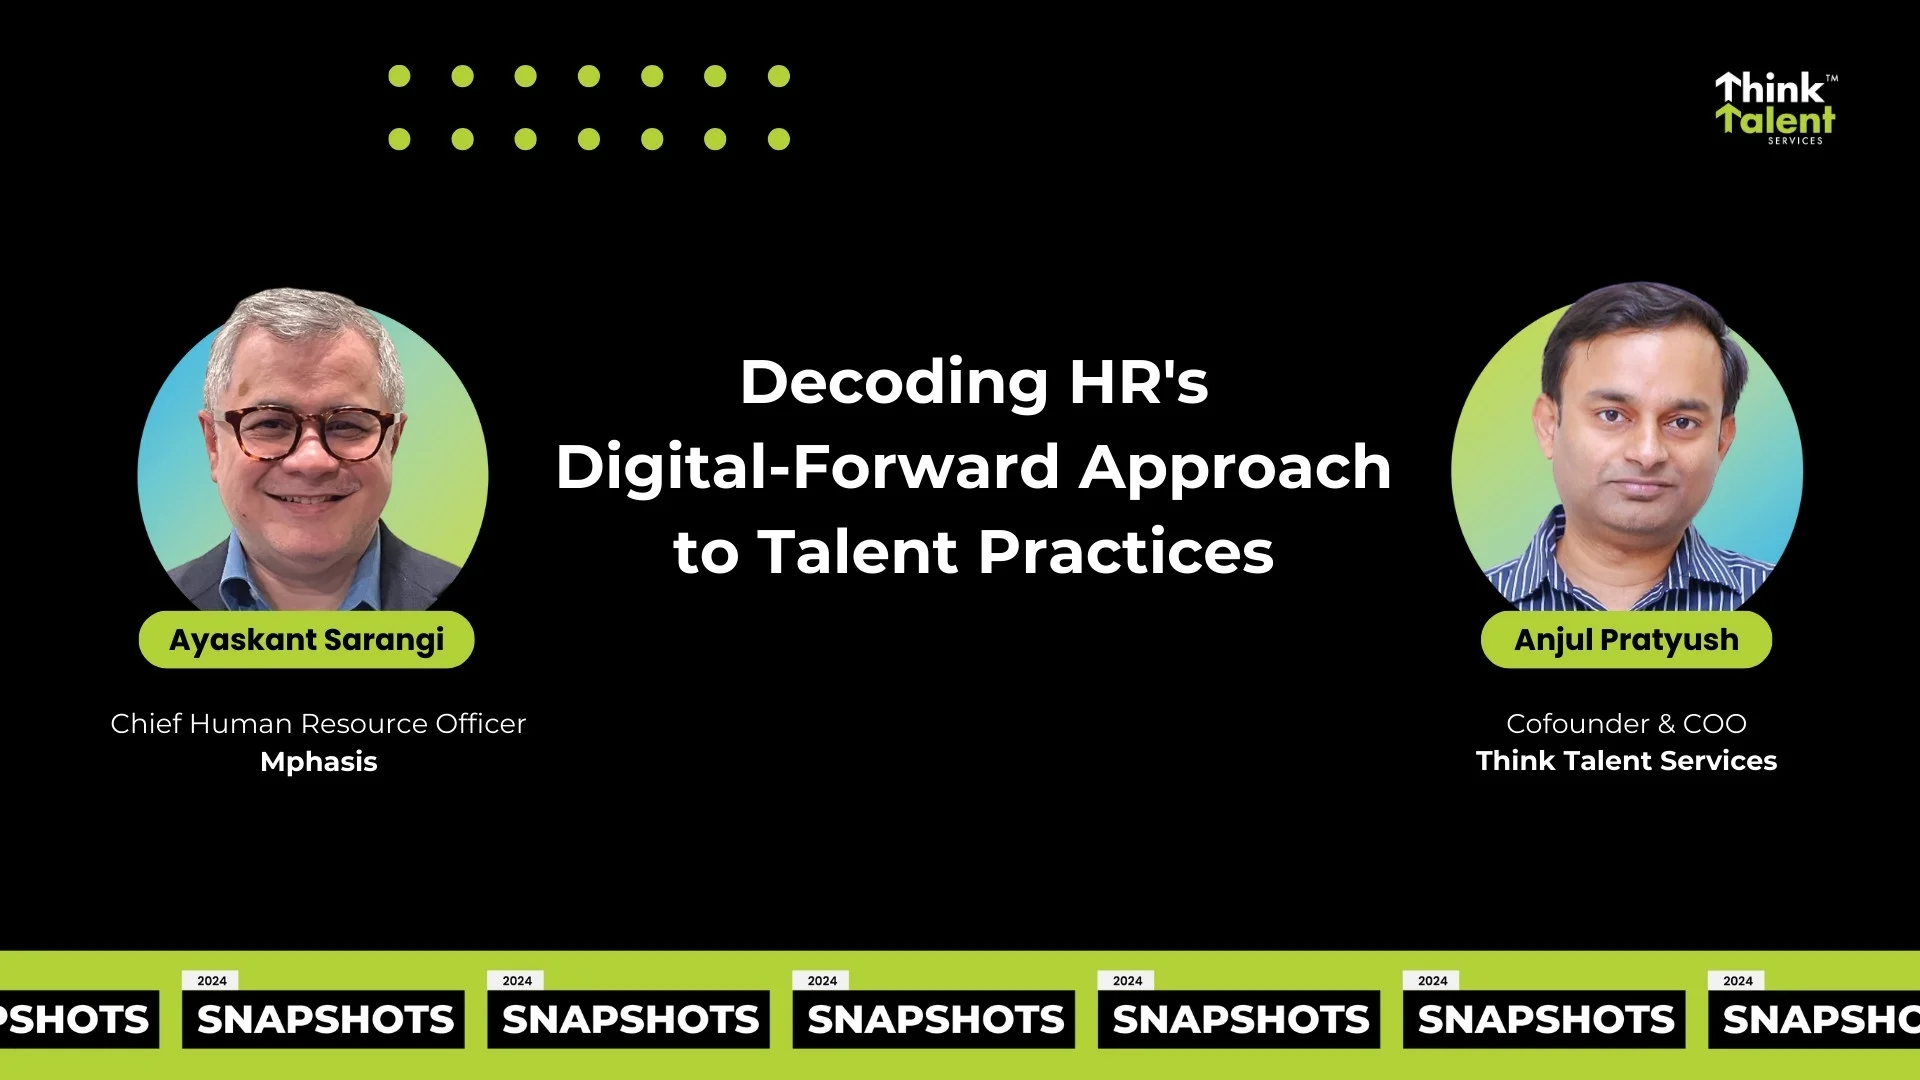 Decoding HR's Digital-Forward Approach to Talent Practices